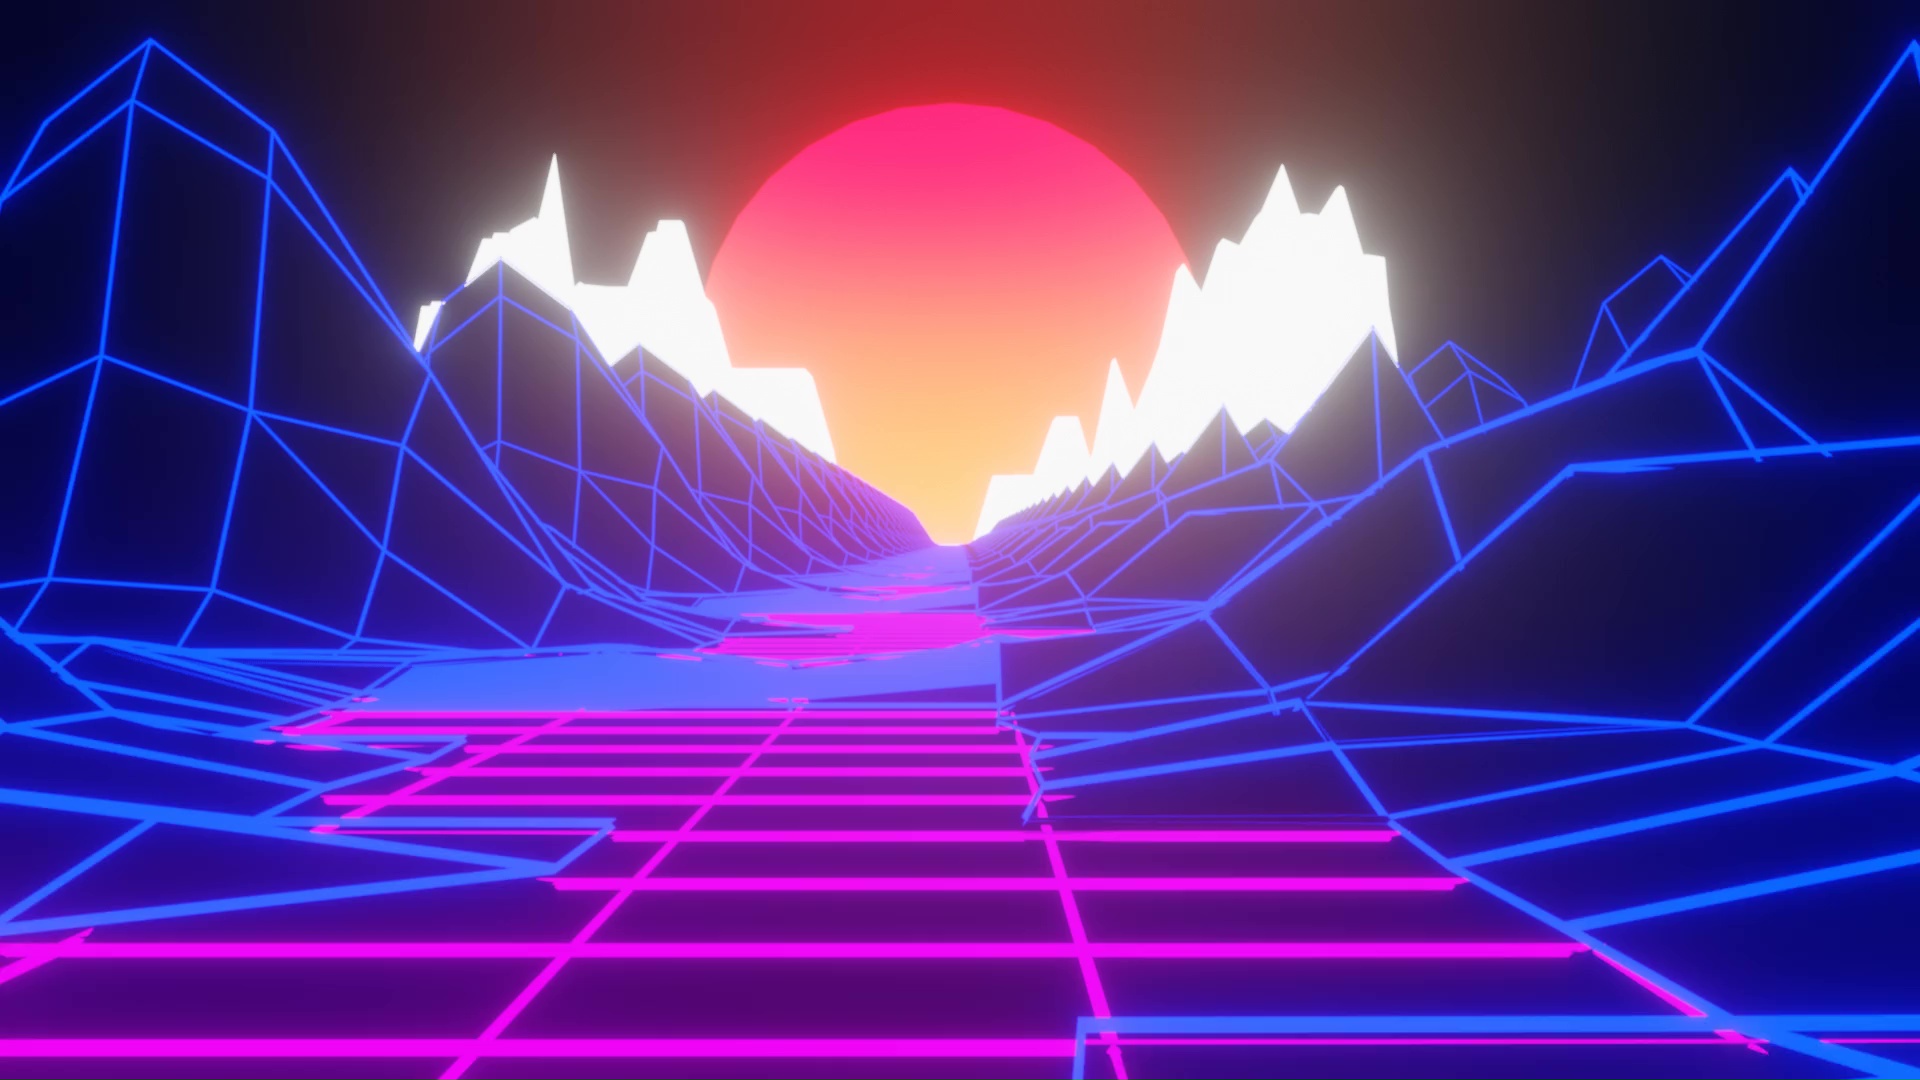 80s Synthwave Retro Hd  Synthwave art Synthwave Vaporwave wallpaper